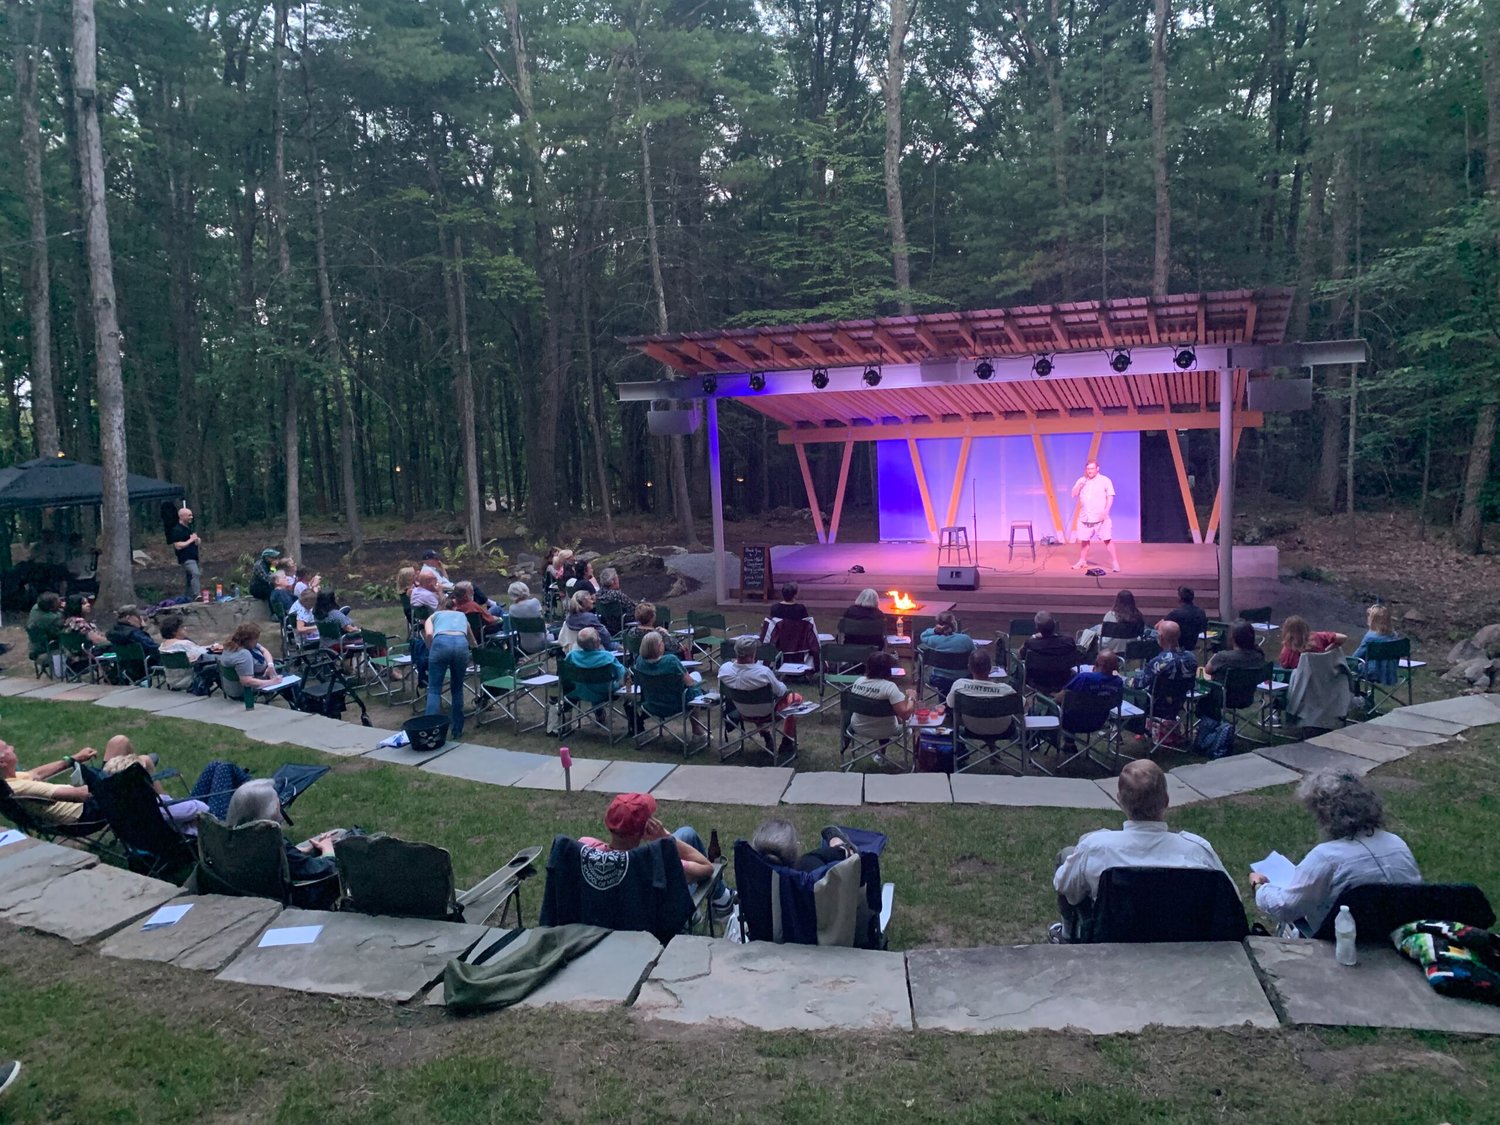 Harmony is the Woods is a intimate outdoor venue for music and other programming that promotes environmental stewardship, arts accessibility and educational enrichment.